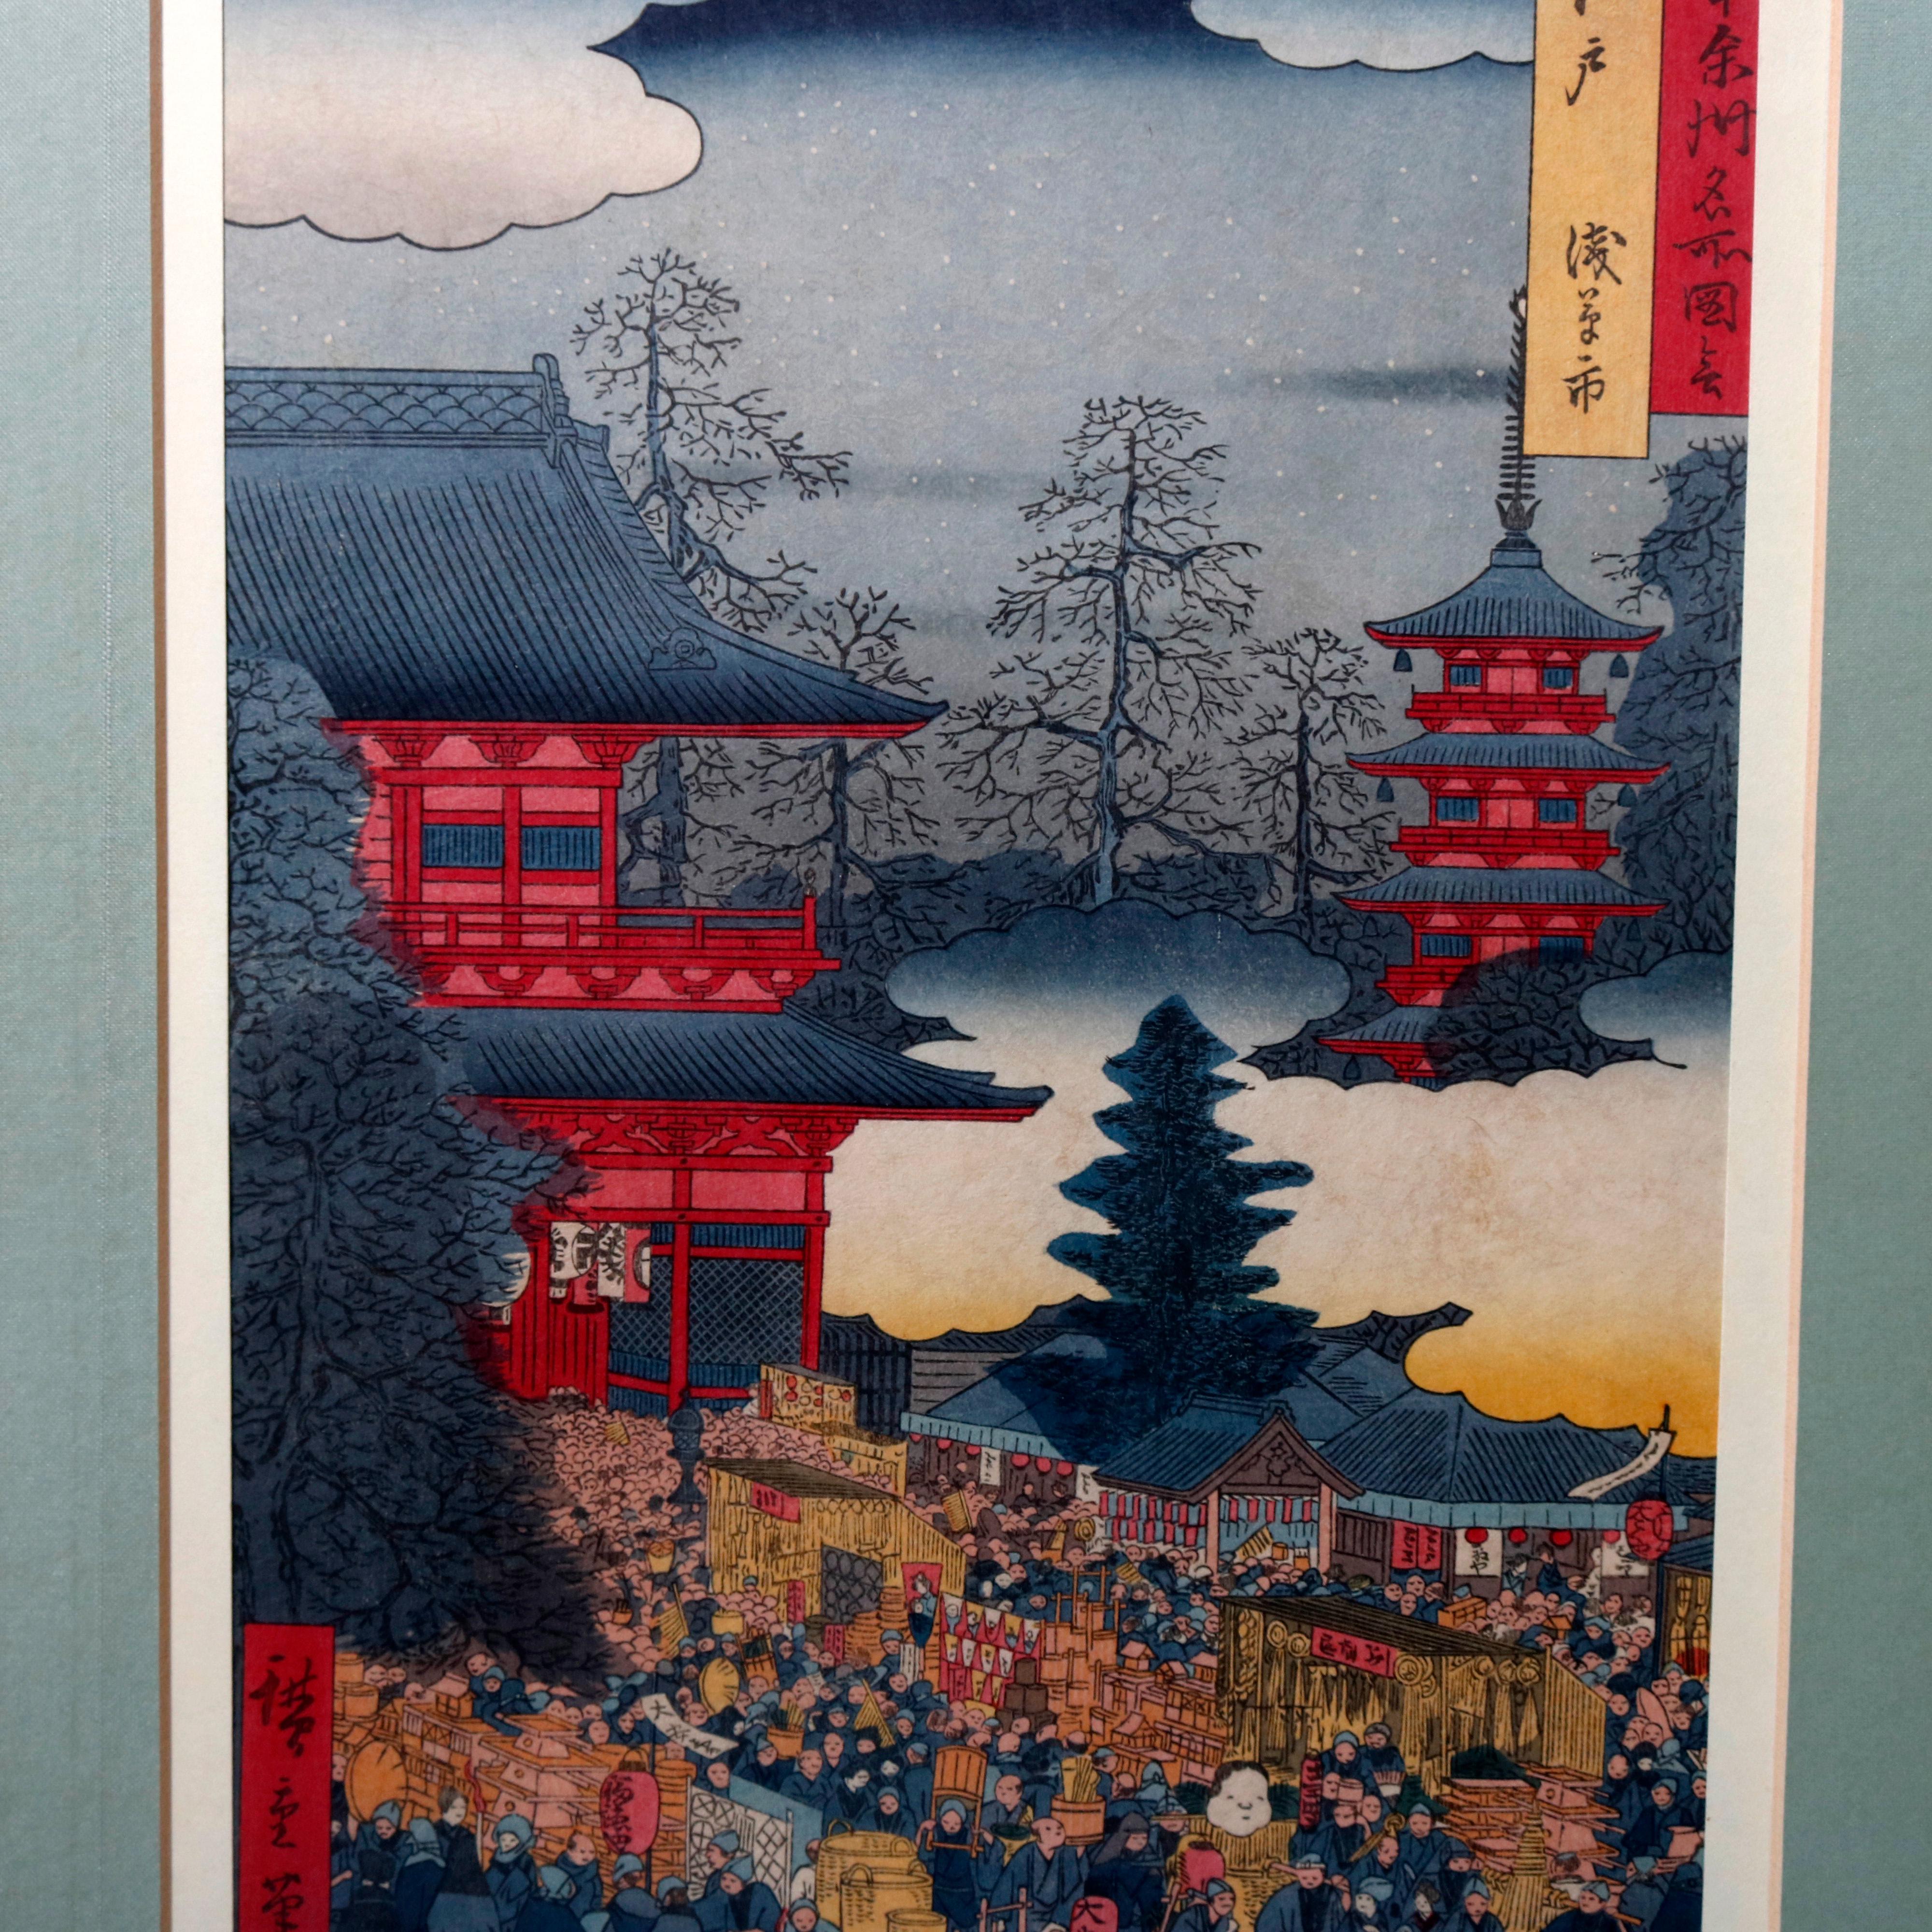 An antique Japanese Hiroshige woodblock print depicts village scene with figures, horses, structures (pagodas) and lake in the background, signed lower left, additional verbiage upper right, circa 1850

Measures: 19.75